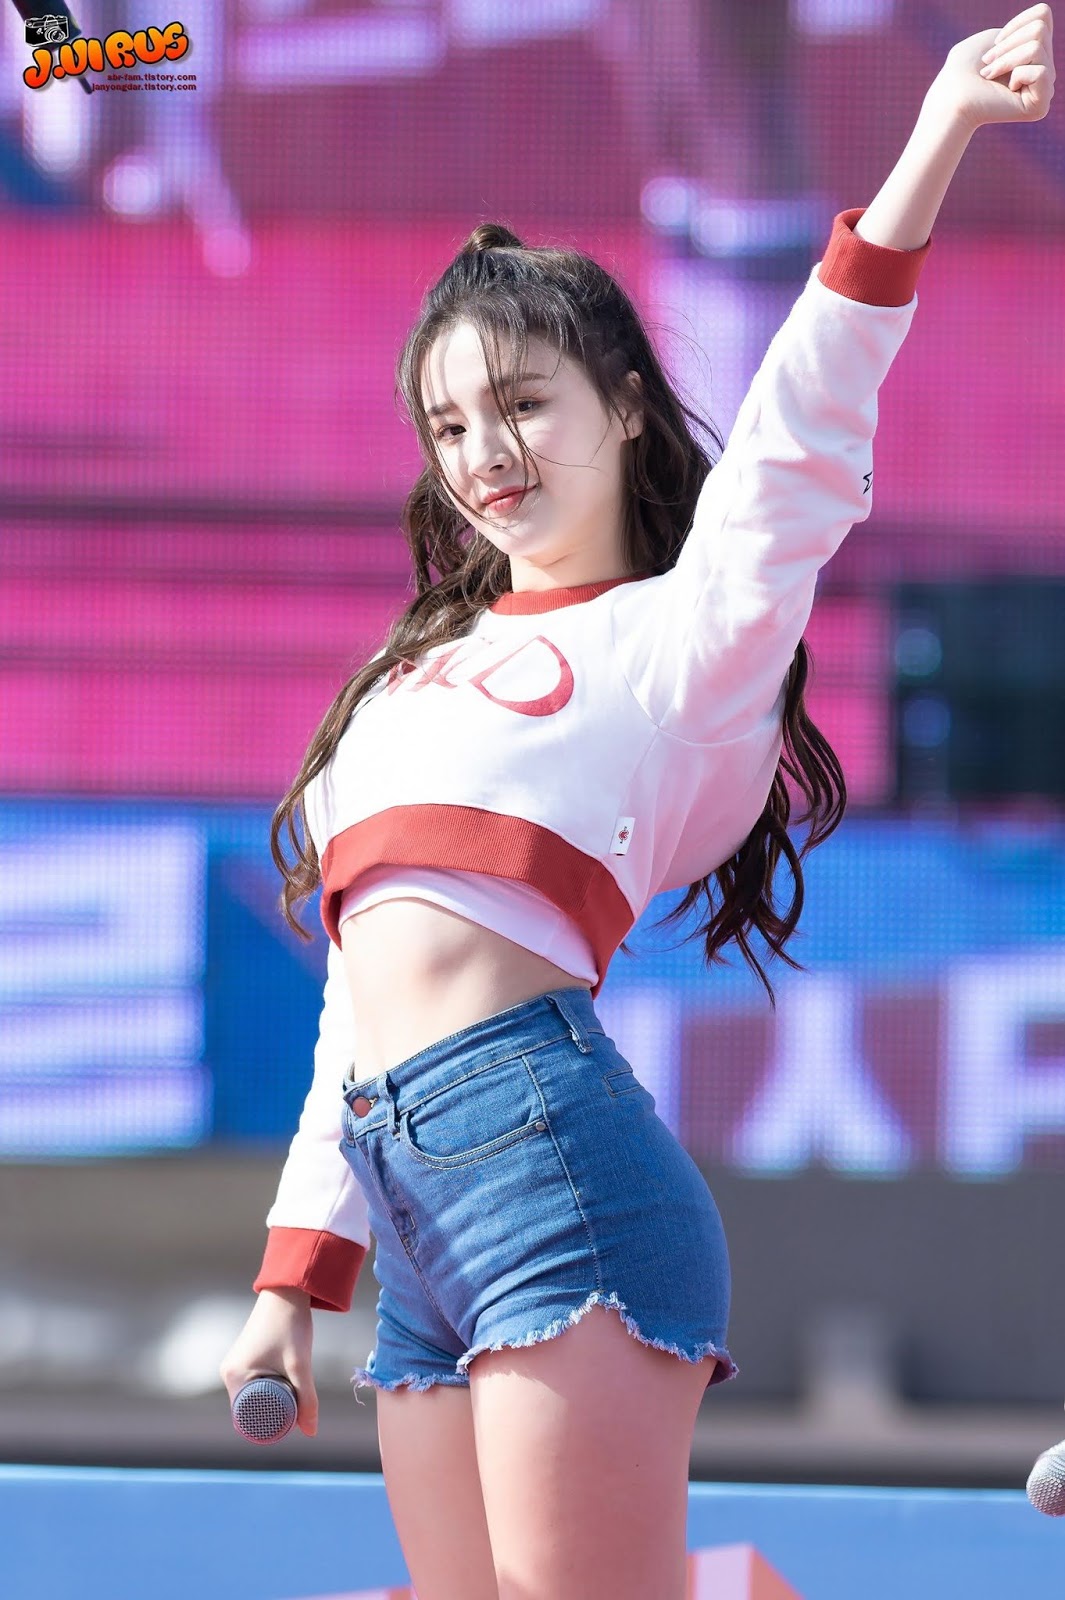 This is the most sexiest out fit of NANCY, MOMOLAND.